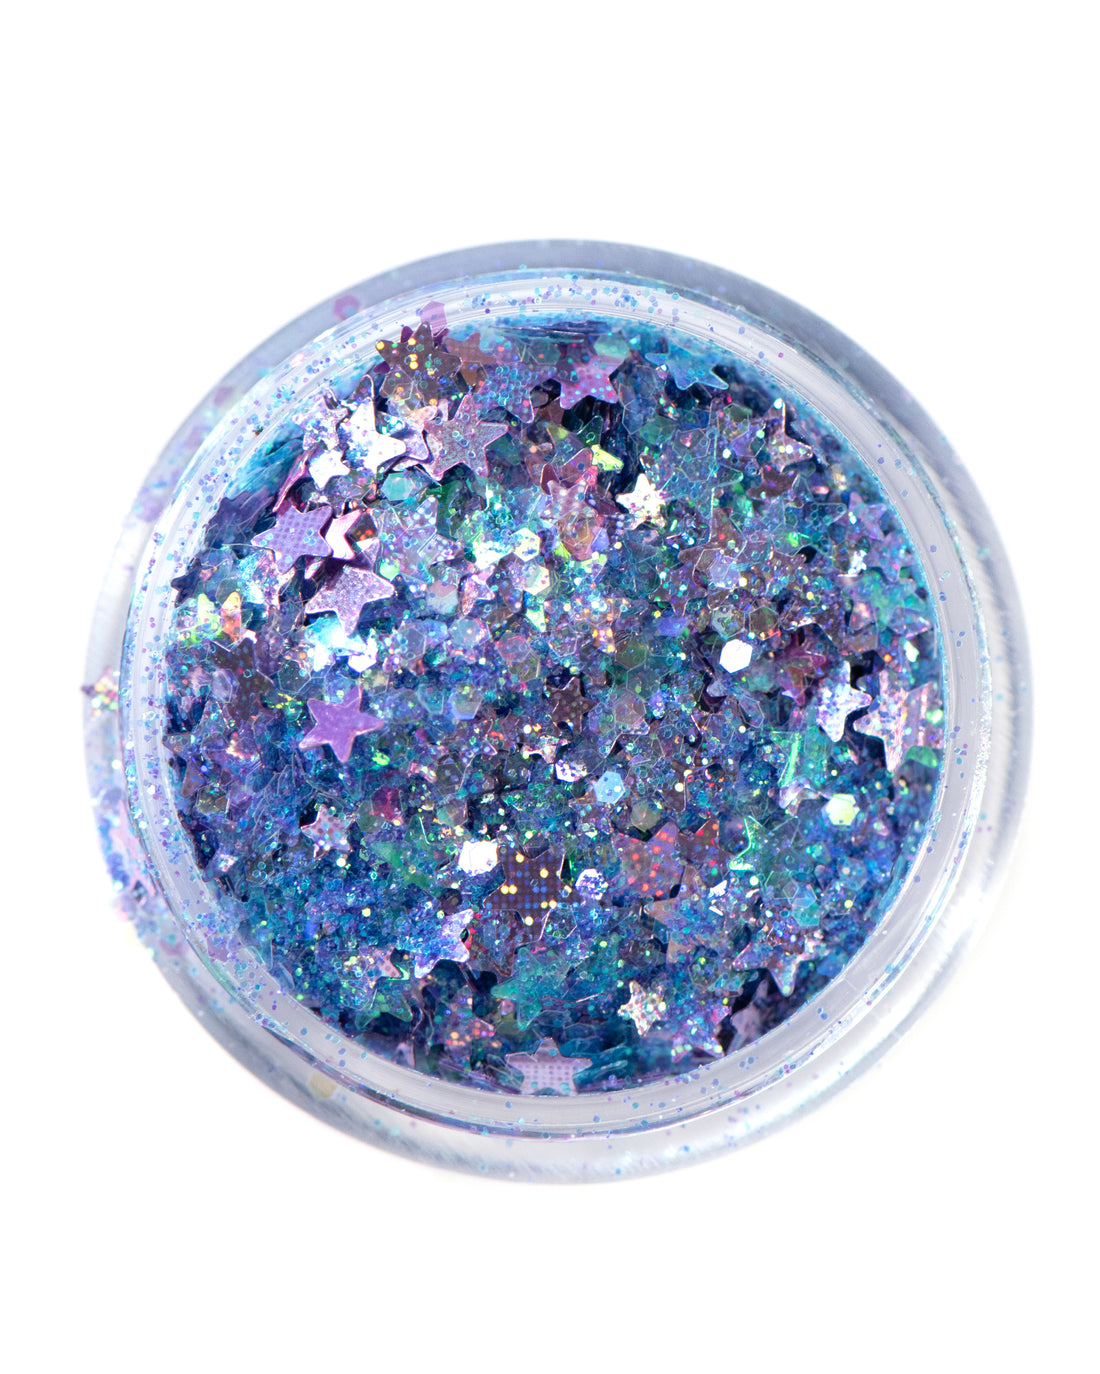 After Party - Holographic Purple and Teal Star Chunky Glitter Mix - Lunautics Chunky Glitter